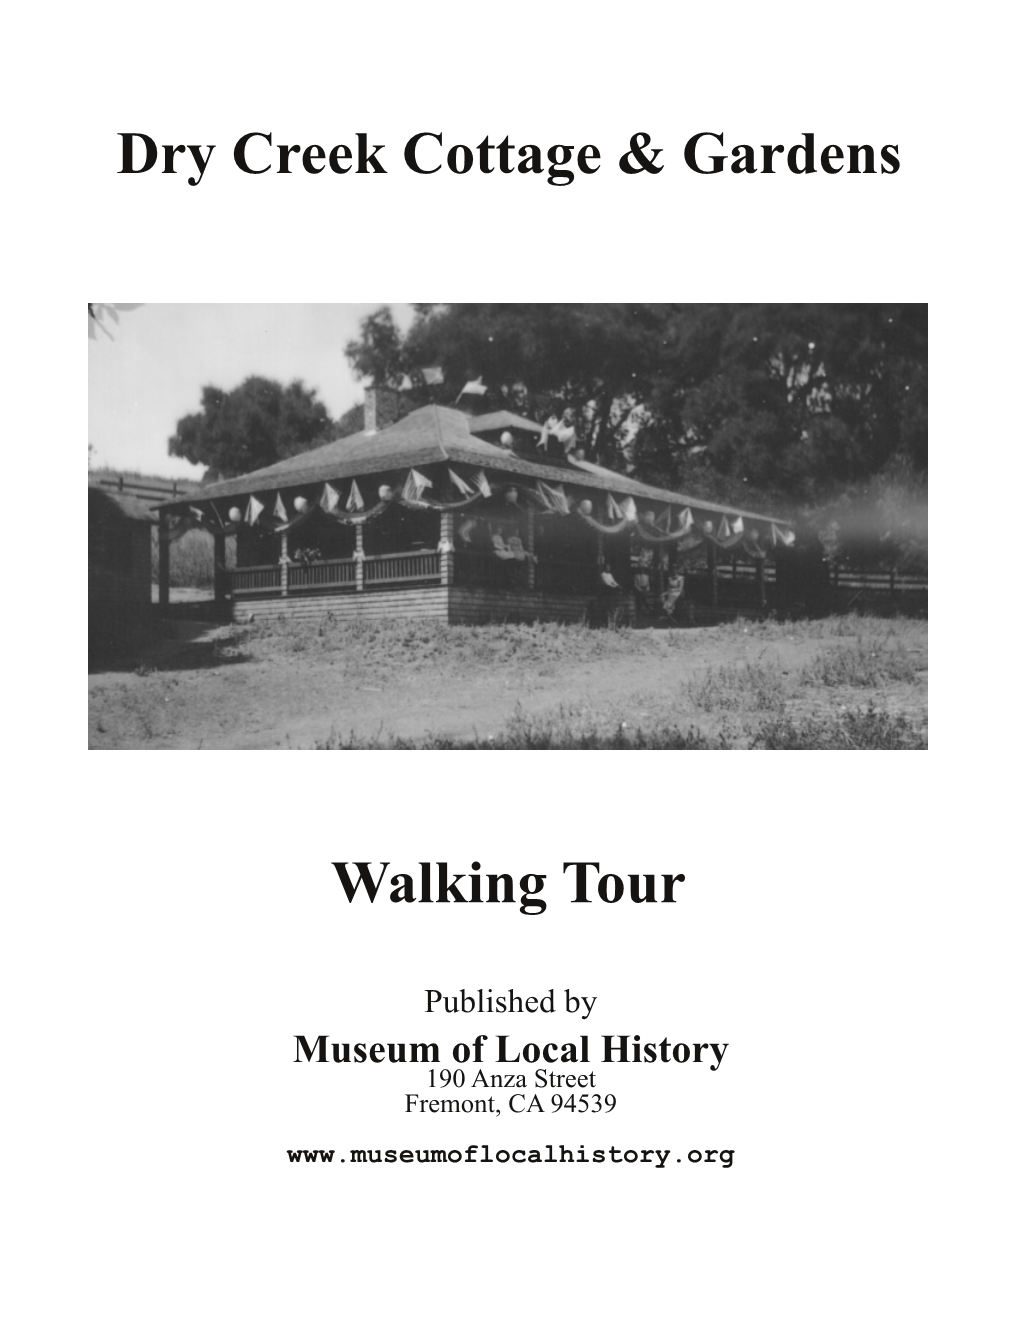 Dry Creek Cottage and Gardens Is Located Off of Mission Blvd at the End of Whipple Rd